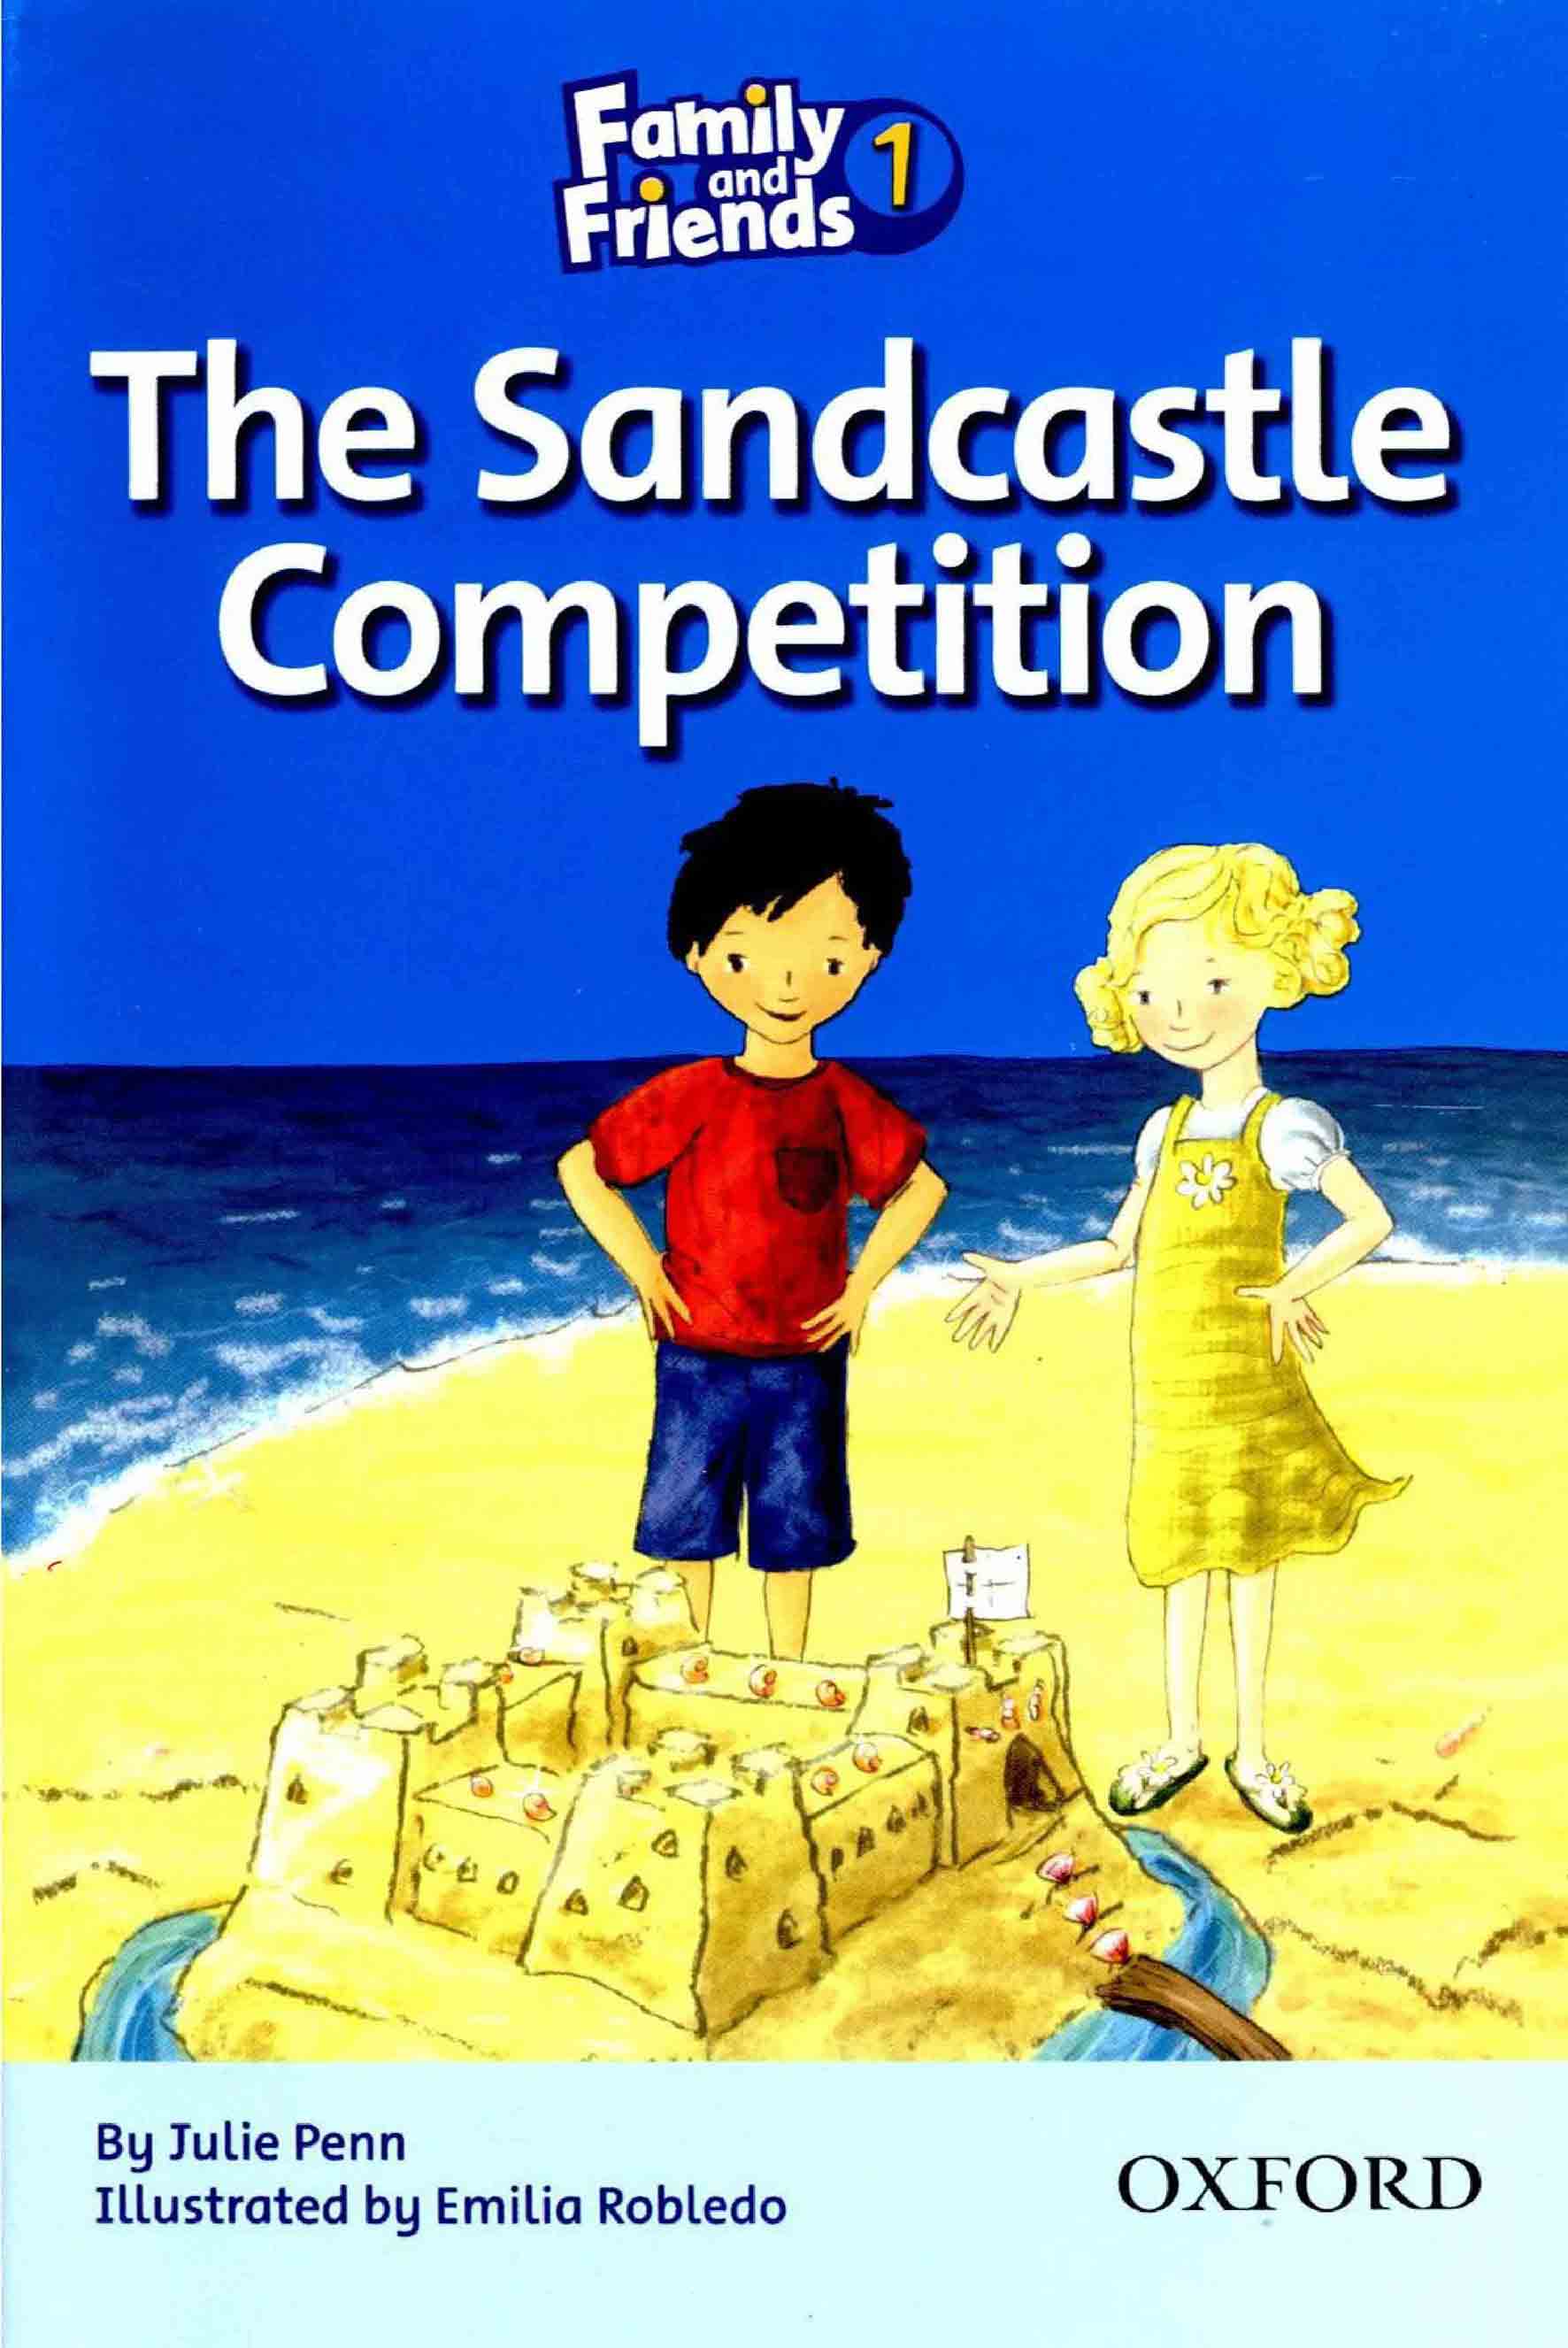 The Sandcastle Competition